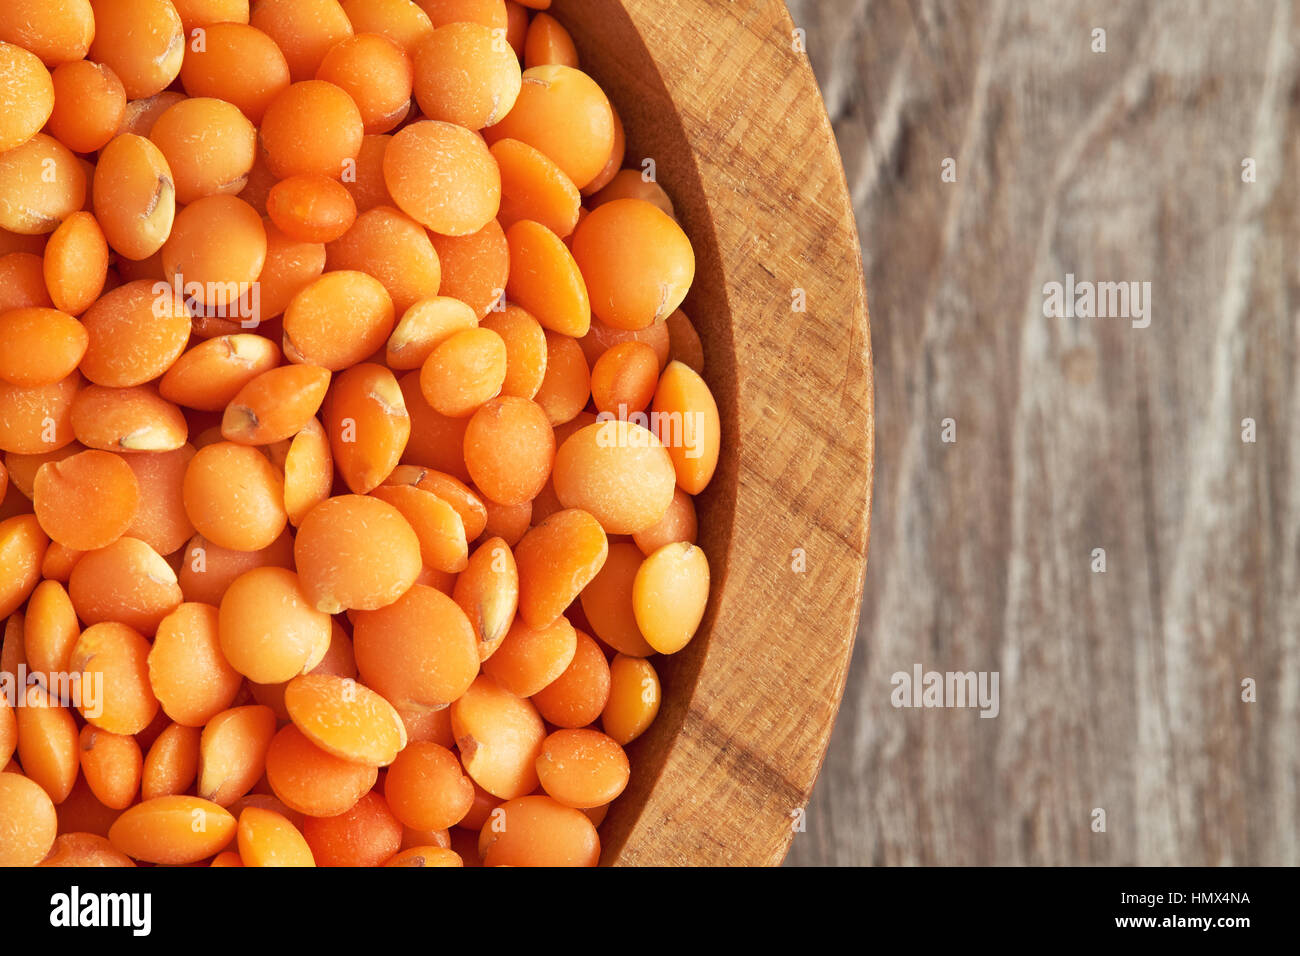 Raw uncooked red lentils in wooden bowl on rustic background. Top view with copy space Stock Photo